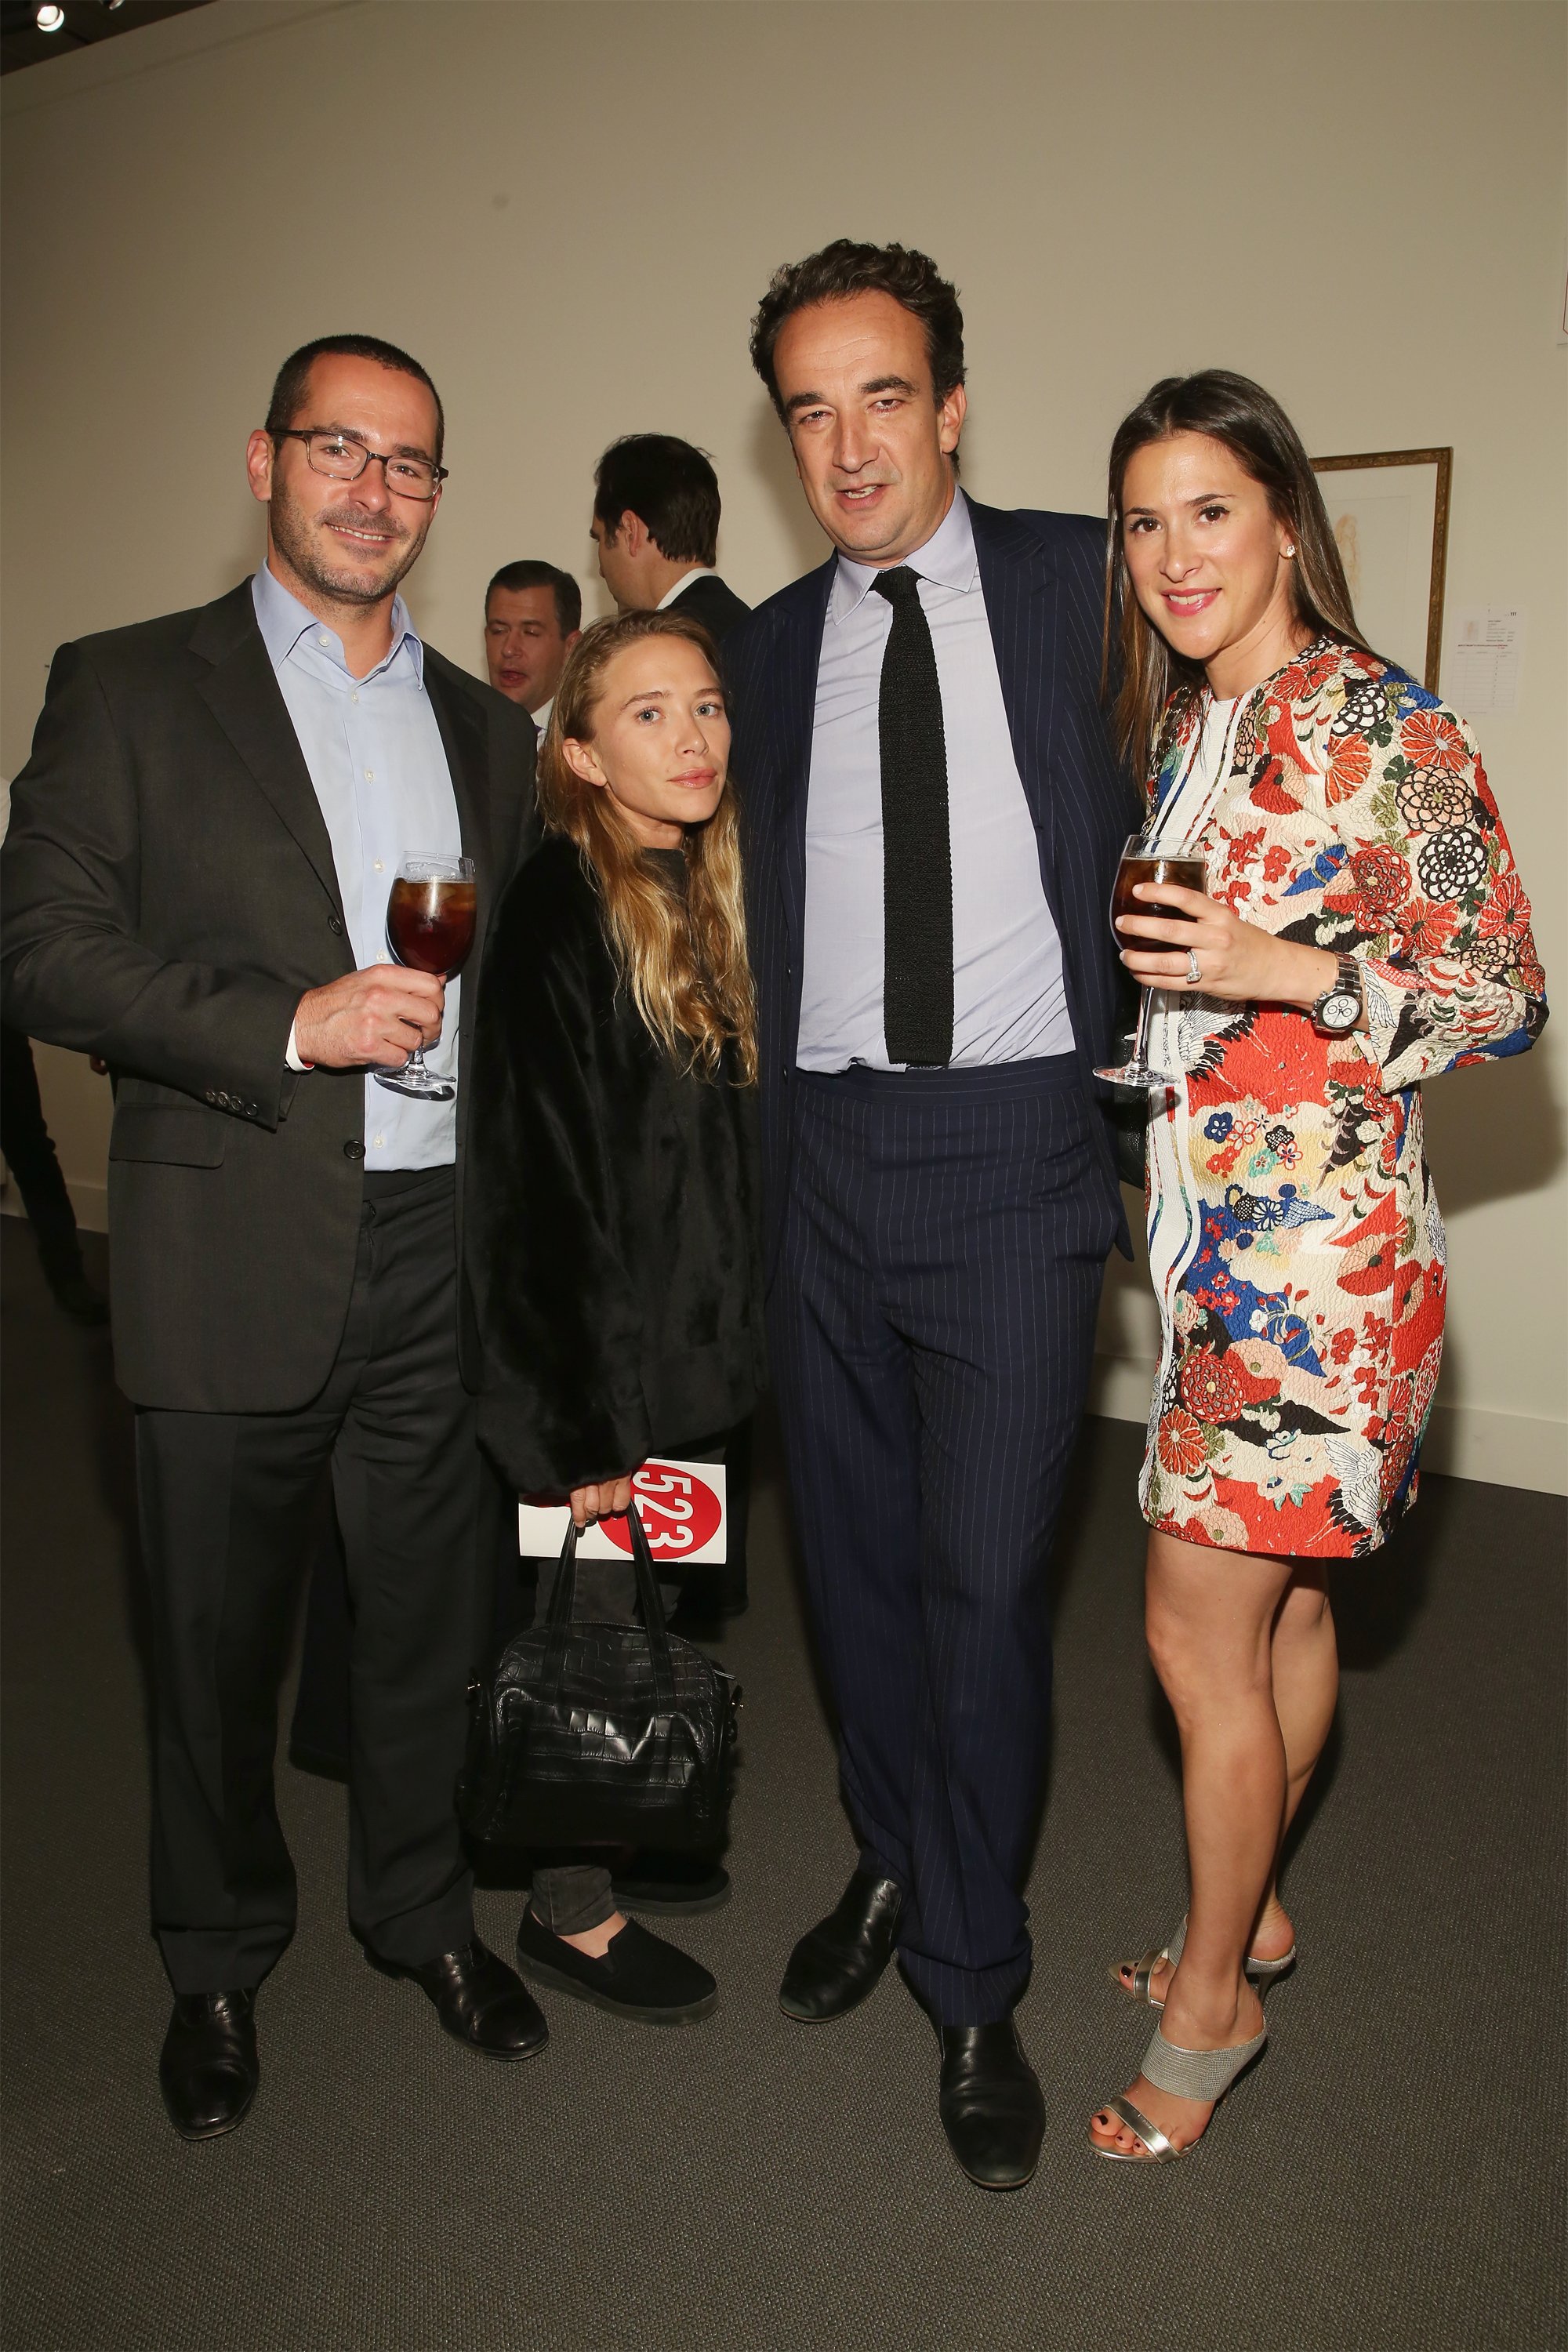 Actress Mary-Kate Olsen pictured with Olivier Sarkozy and guests during 2015 Take Home a Nude Art Auction and Party at Sotheby's on October 15, 2015 in New York City. / Source: Getty Images